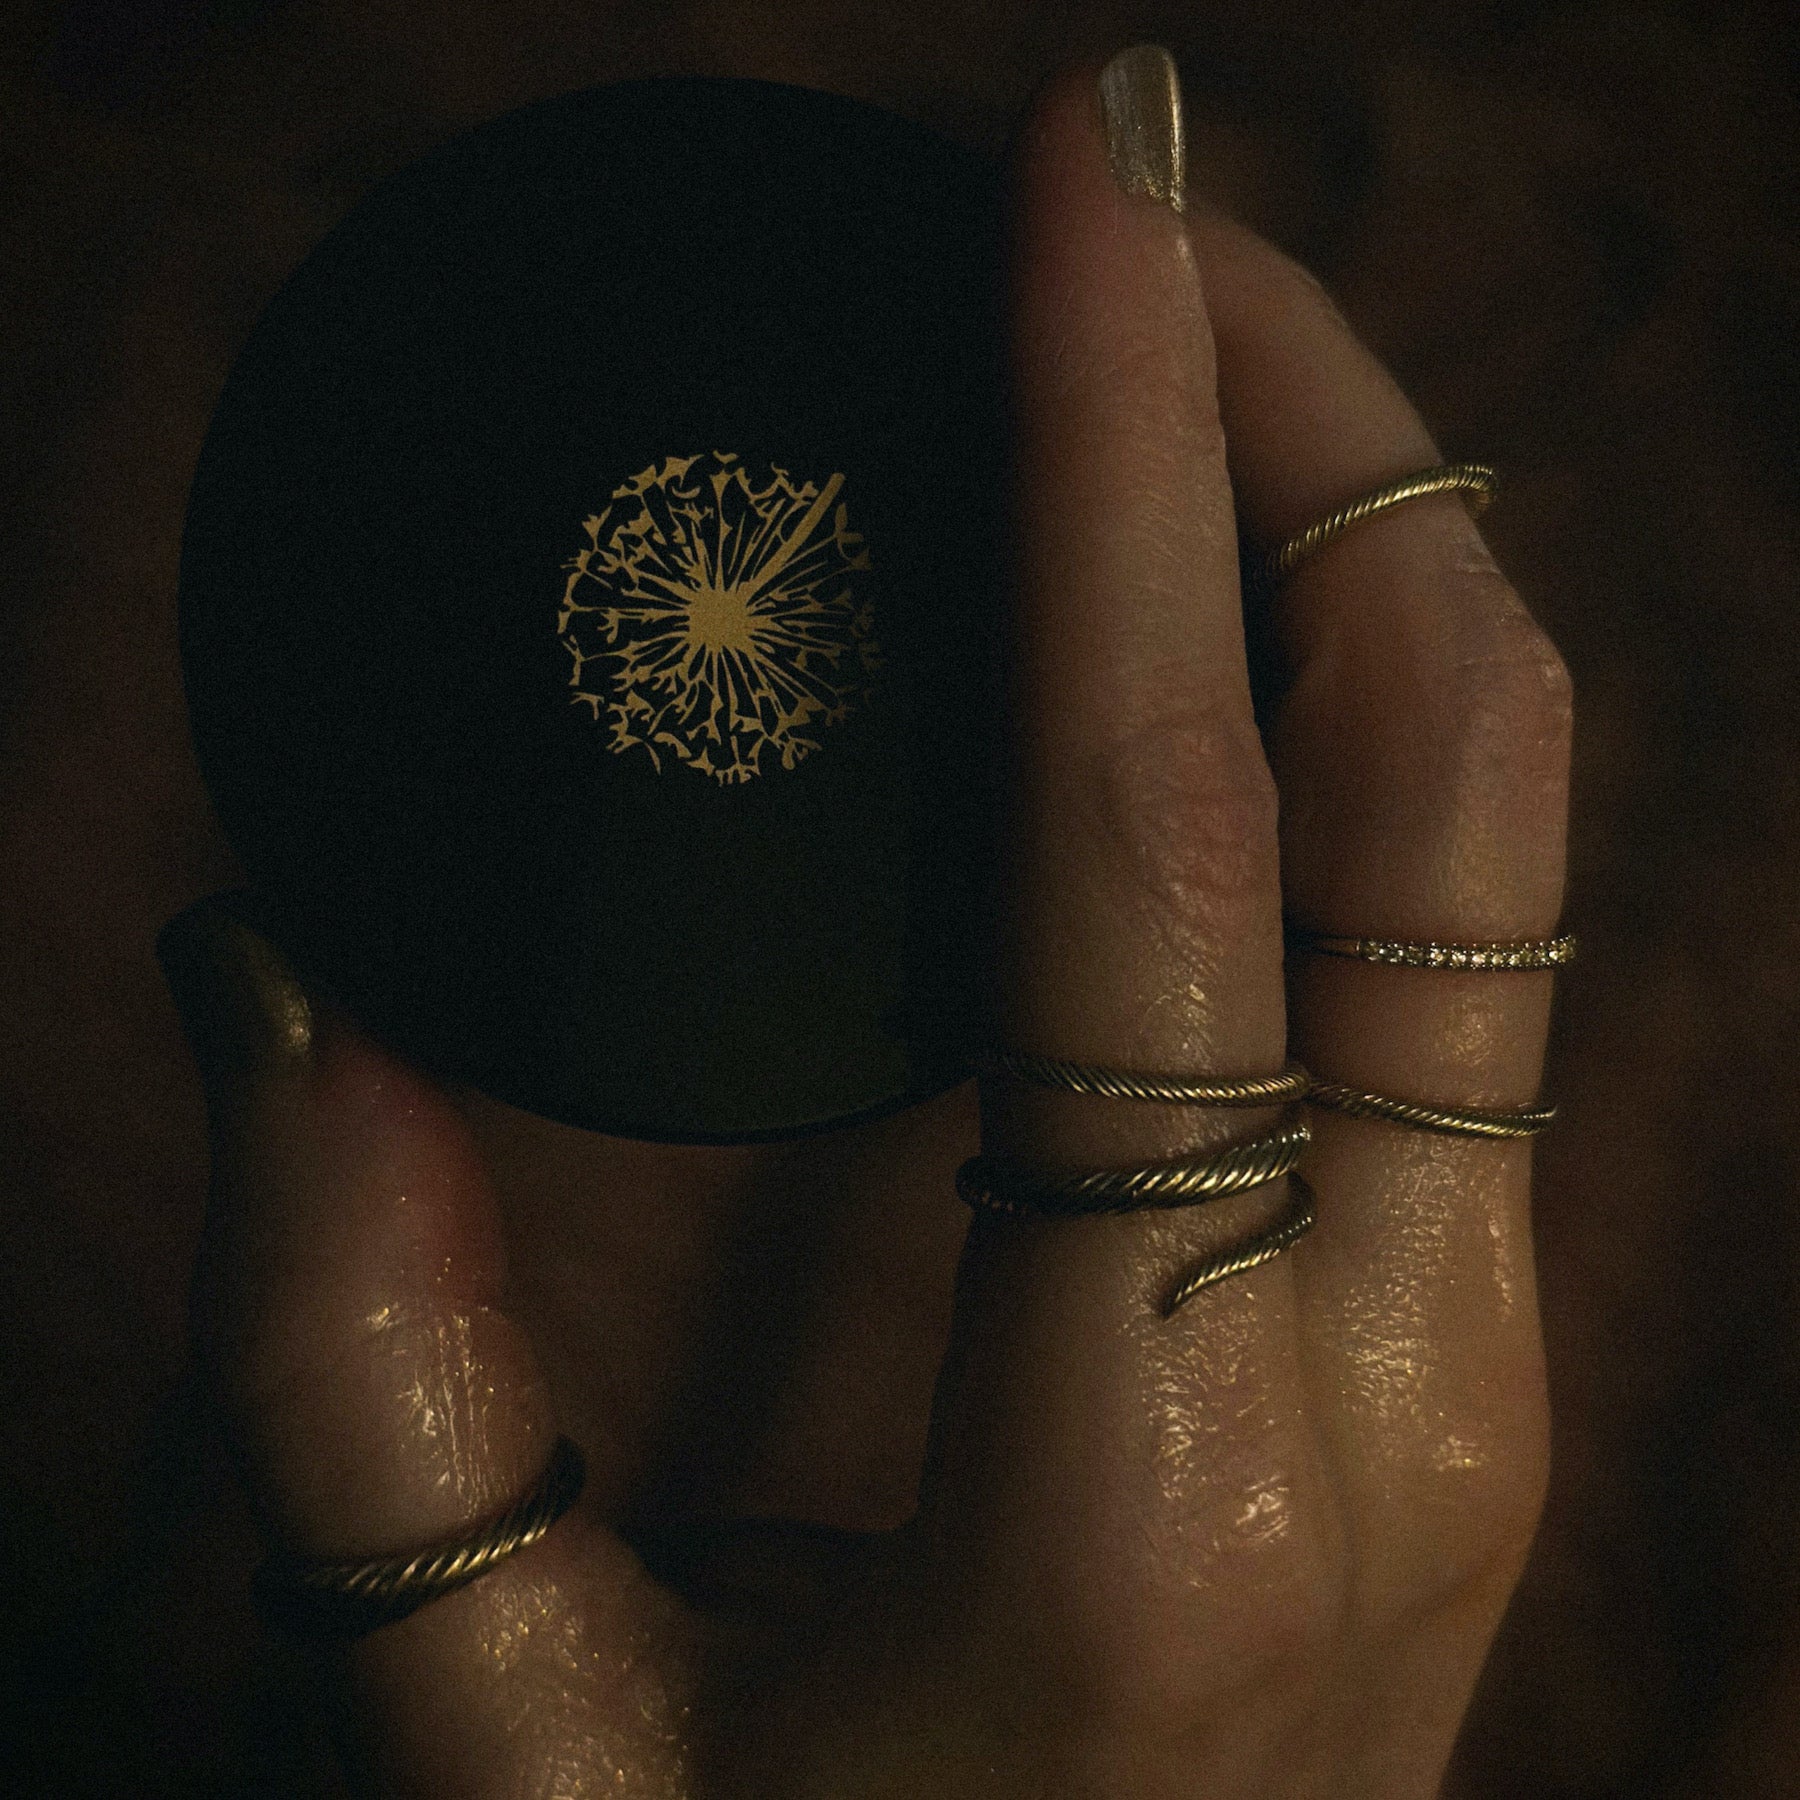 Aiden Jae's gold rings and May Lindstrom Skin's The Blue Cocoon.